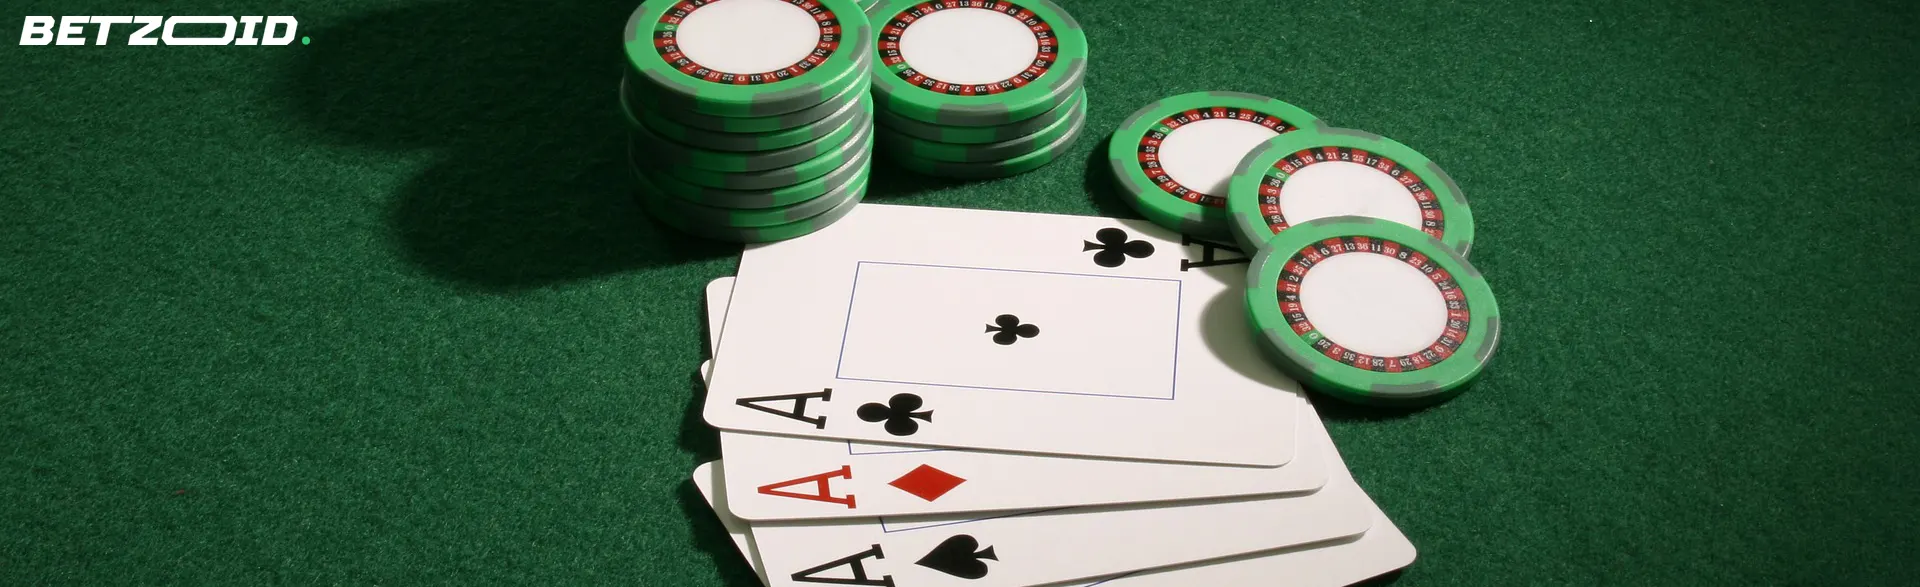 Poker hand with two Aces and green casino chips, representing overseas casinos in Canada.